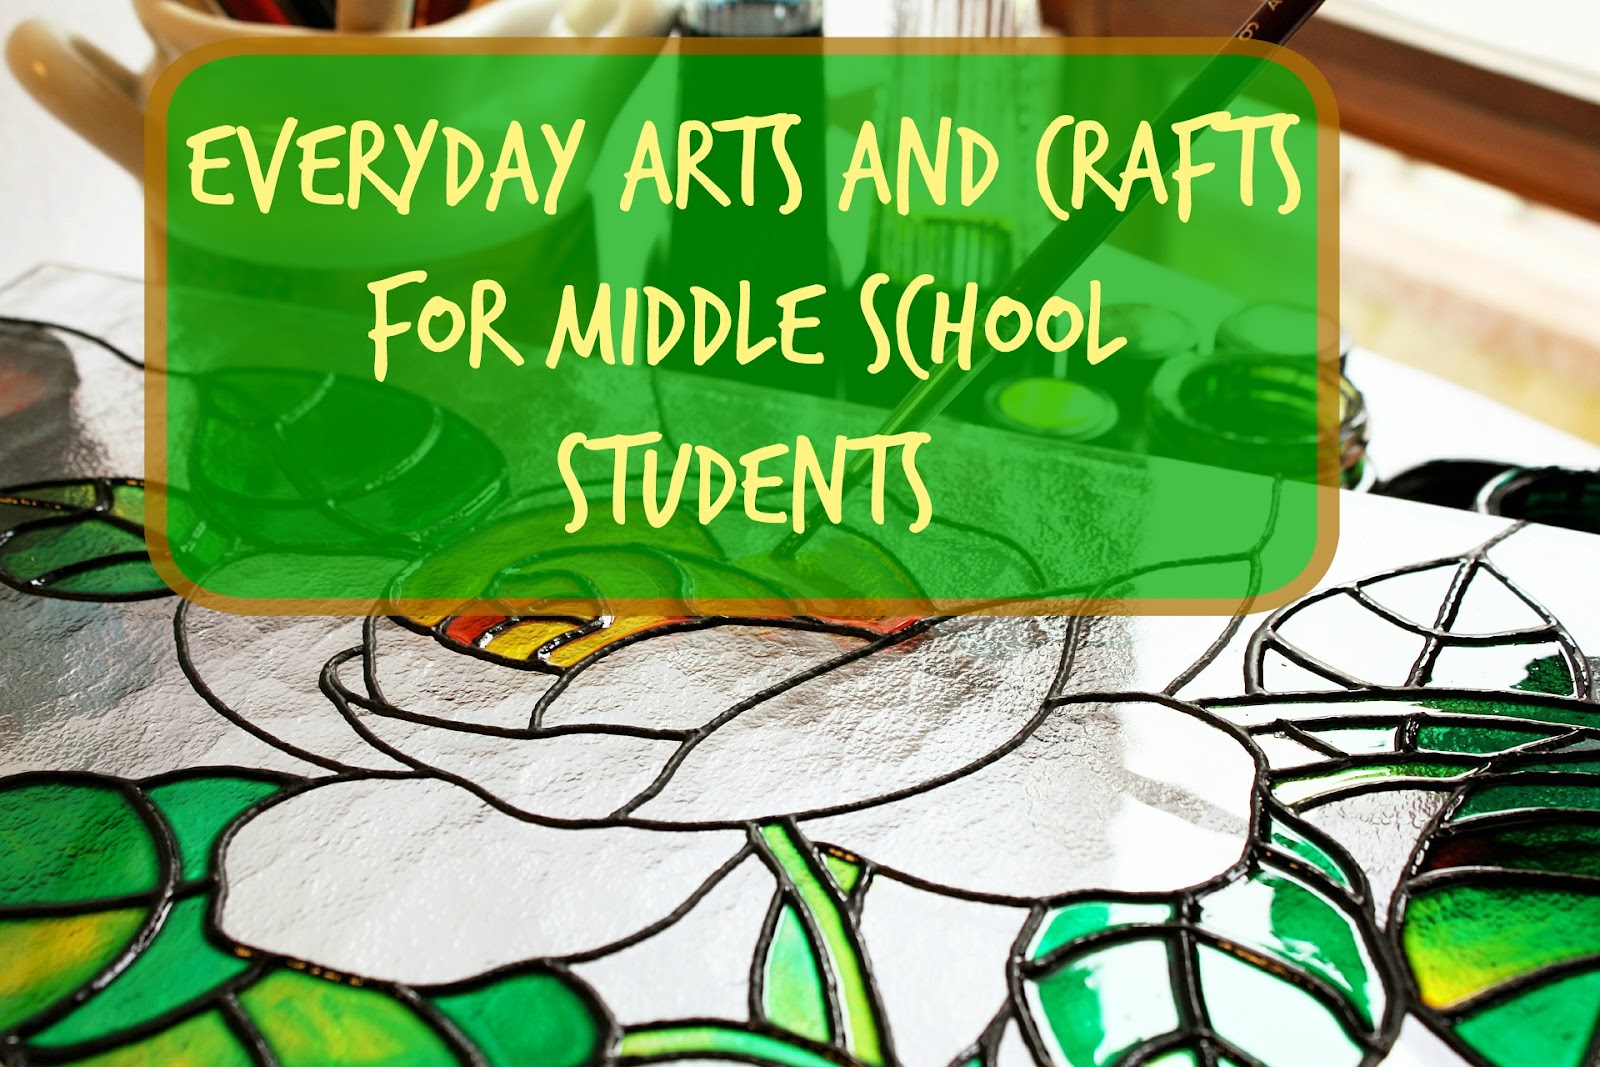 Our Unschooling Journey Through Life: Everyday Arts and Crafts for